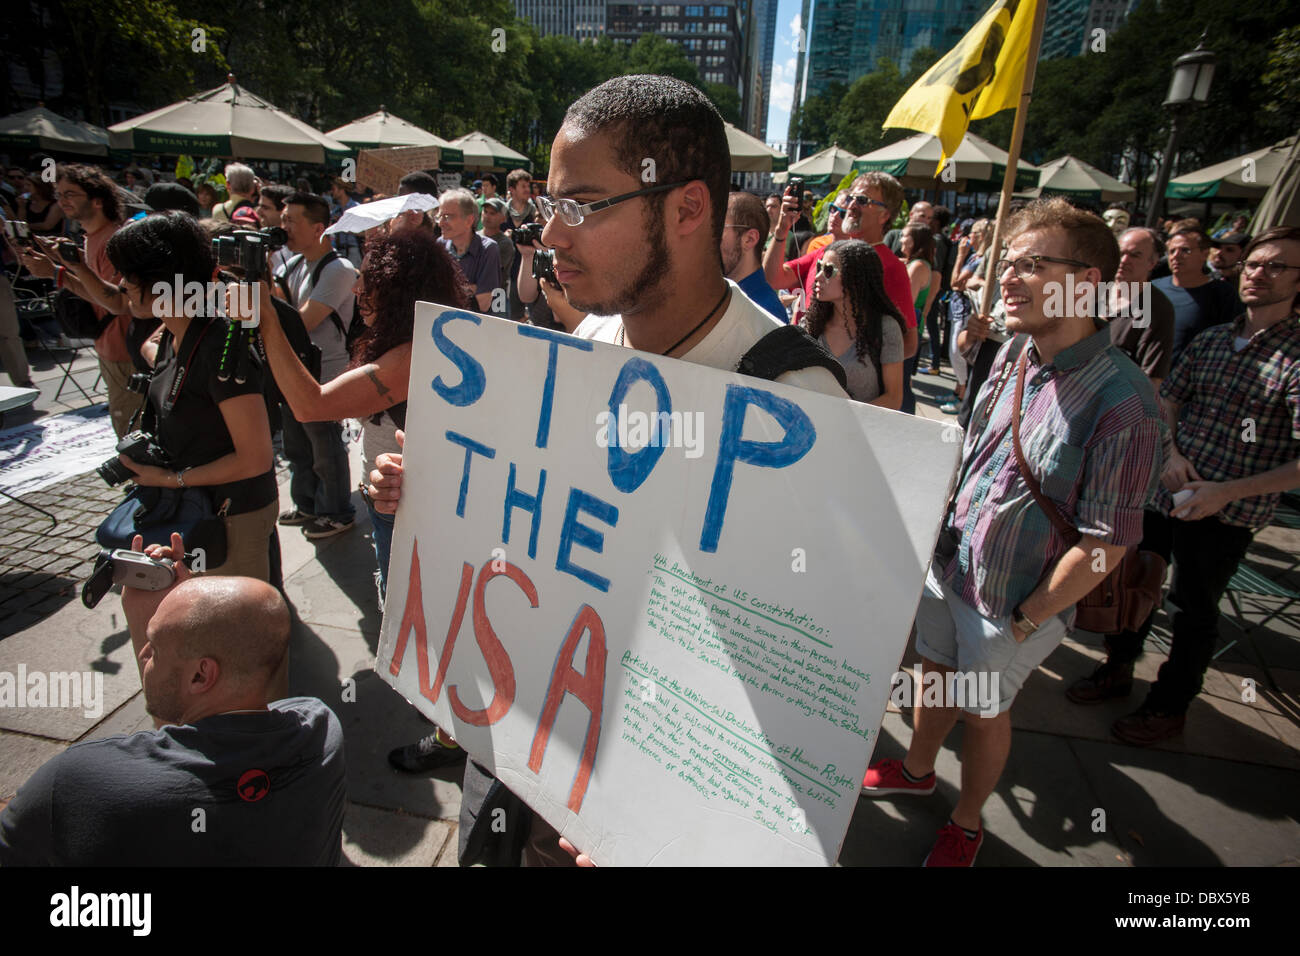 New York, New York. 04th Aug, 2013. Protesters in midtown Manhattan in New York demonstrate against the National Security Agency's surveillance of Americans' email and telephone conversations on Sunday, August 4, 2013. The protest was organized by a group called 'Restore the Fourth' referring to the Fourth Amendment of the Constitution which protects citizens against unreasonable searches by the government. Many citizens are opposed to the NSA activities and the events which took place around the country were called '1984 Day'. Credit:  Richard Levine/Alamy Live News Stock Photo